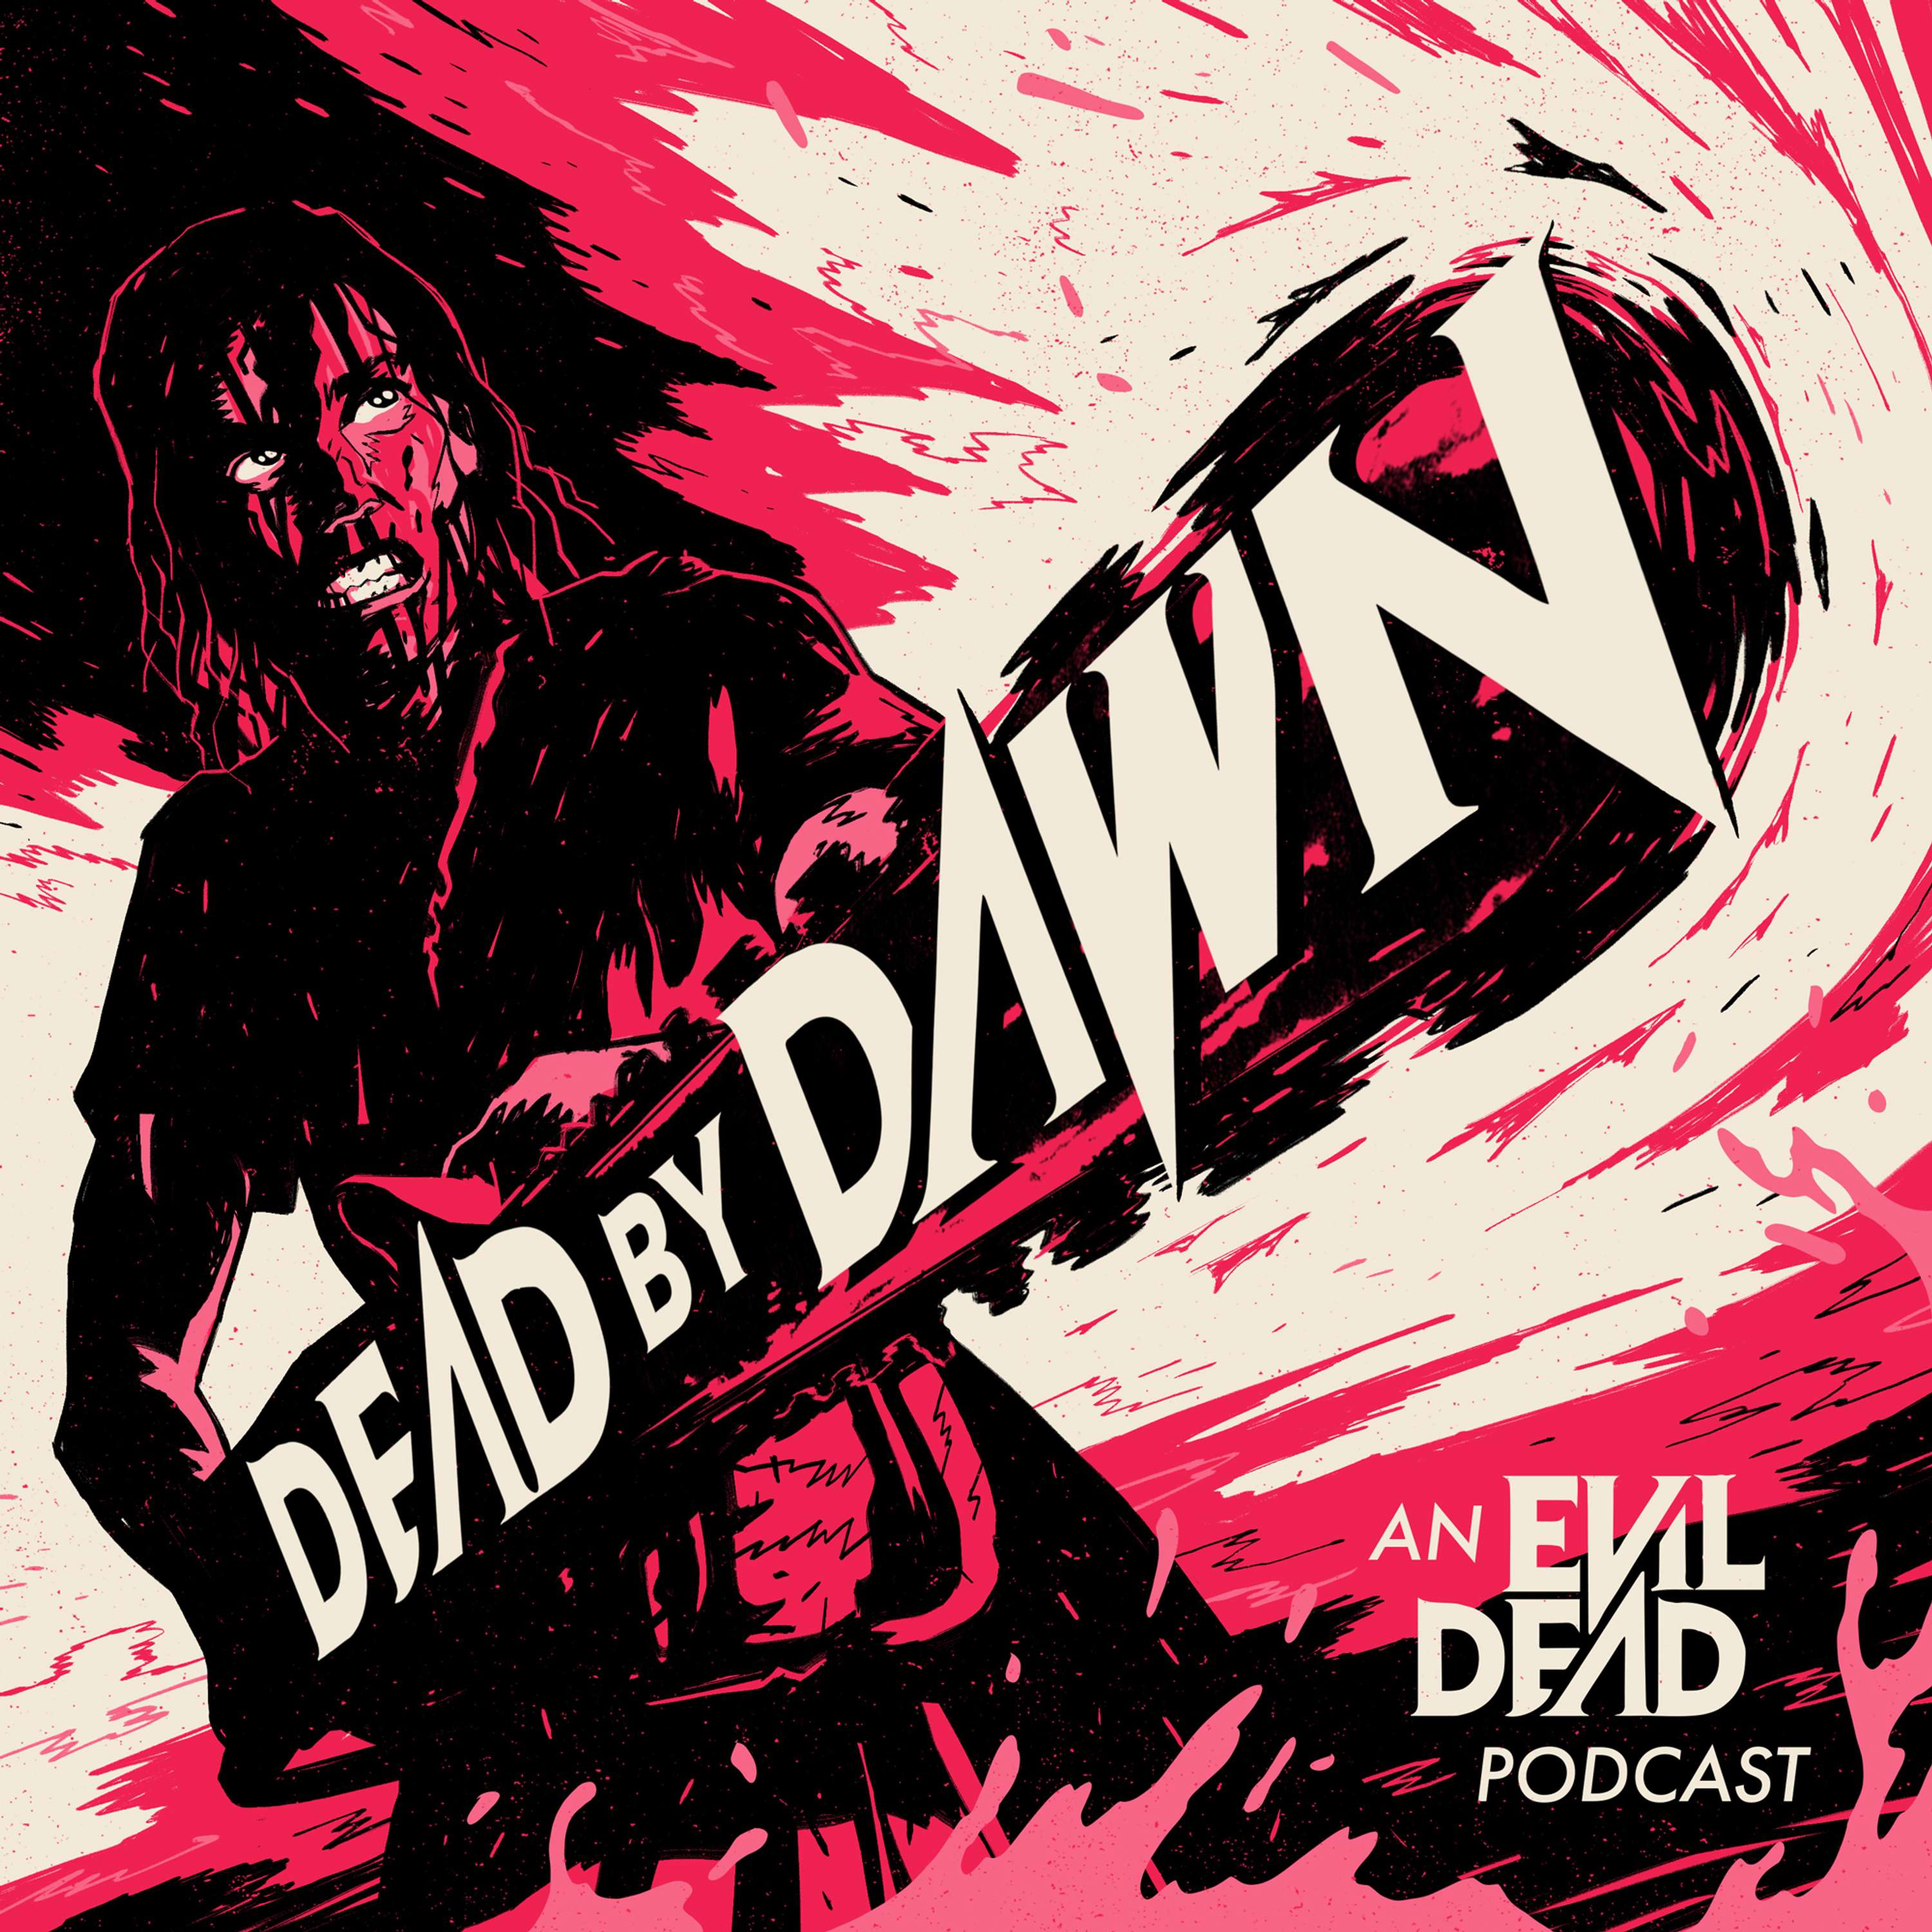 Introducing...Dead By Dawn: An Evil Dead Podcast